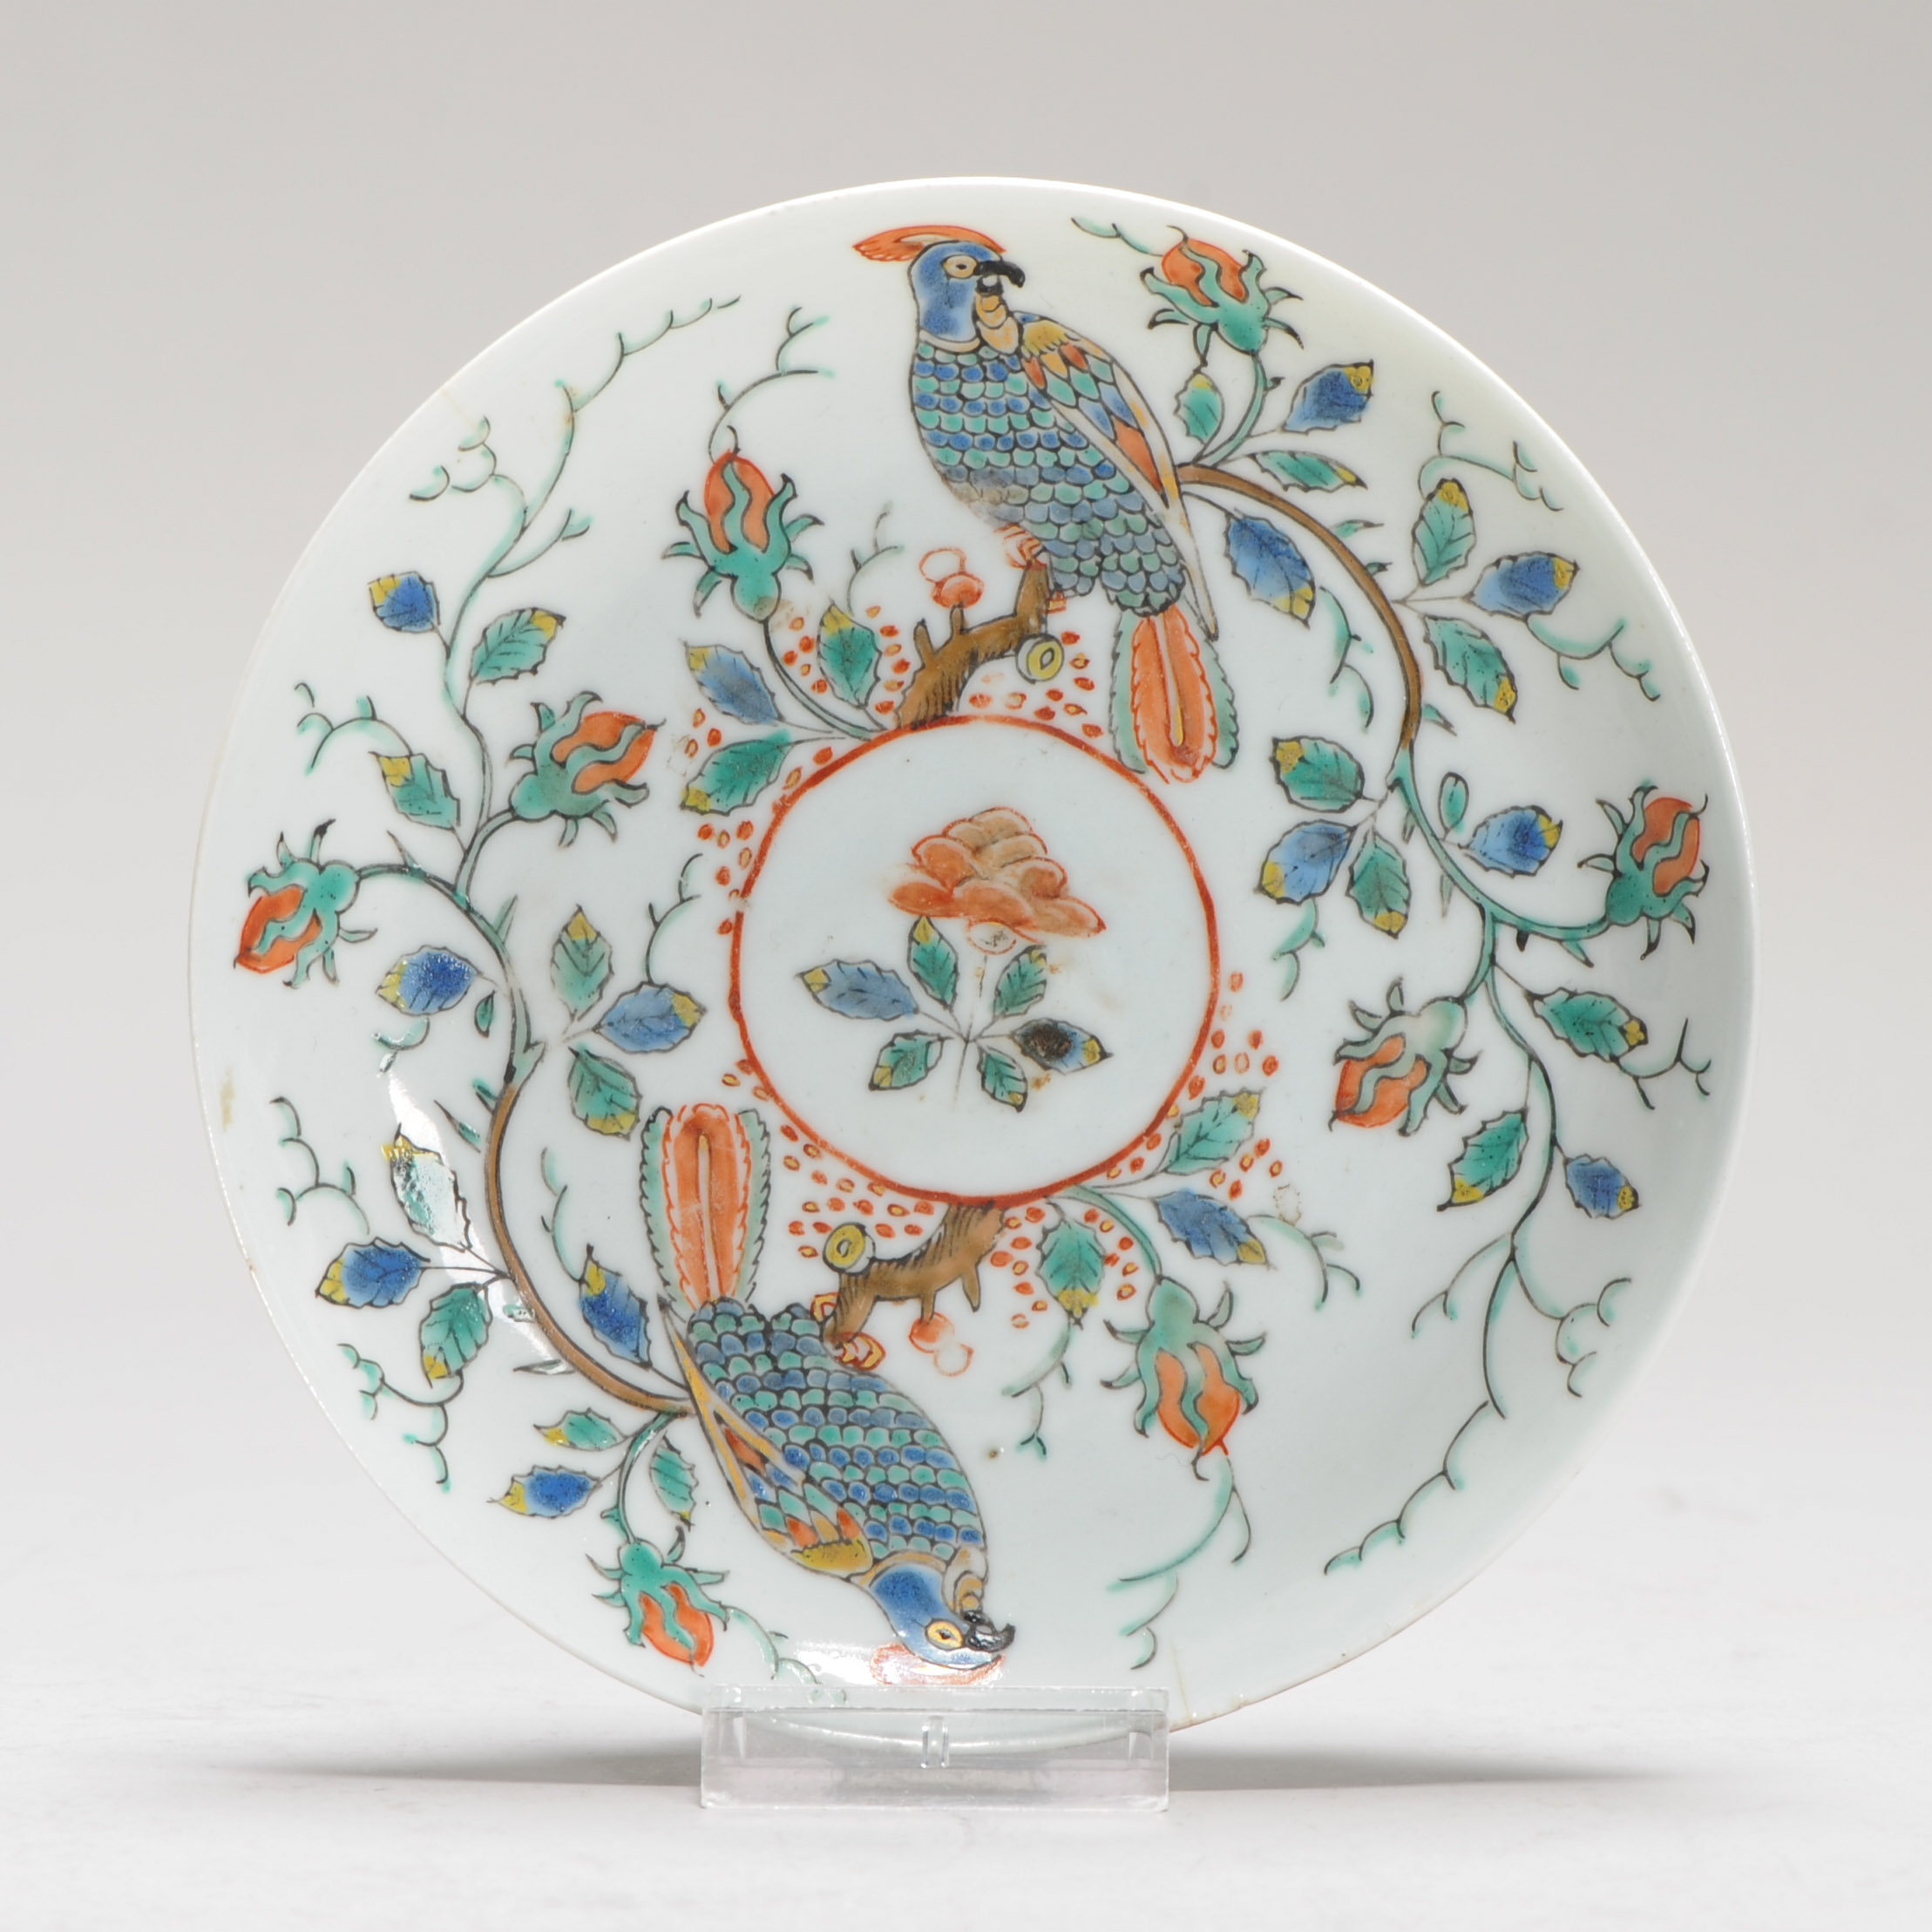 1246 A Lovely Chinese Saucer Dish, decorated with Parrots in Europe on a Chinese blank